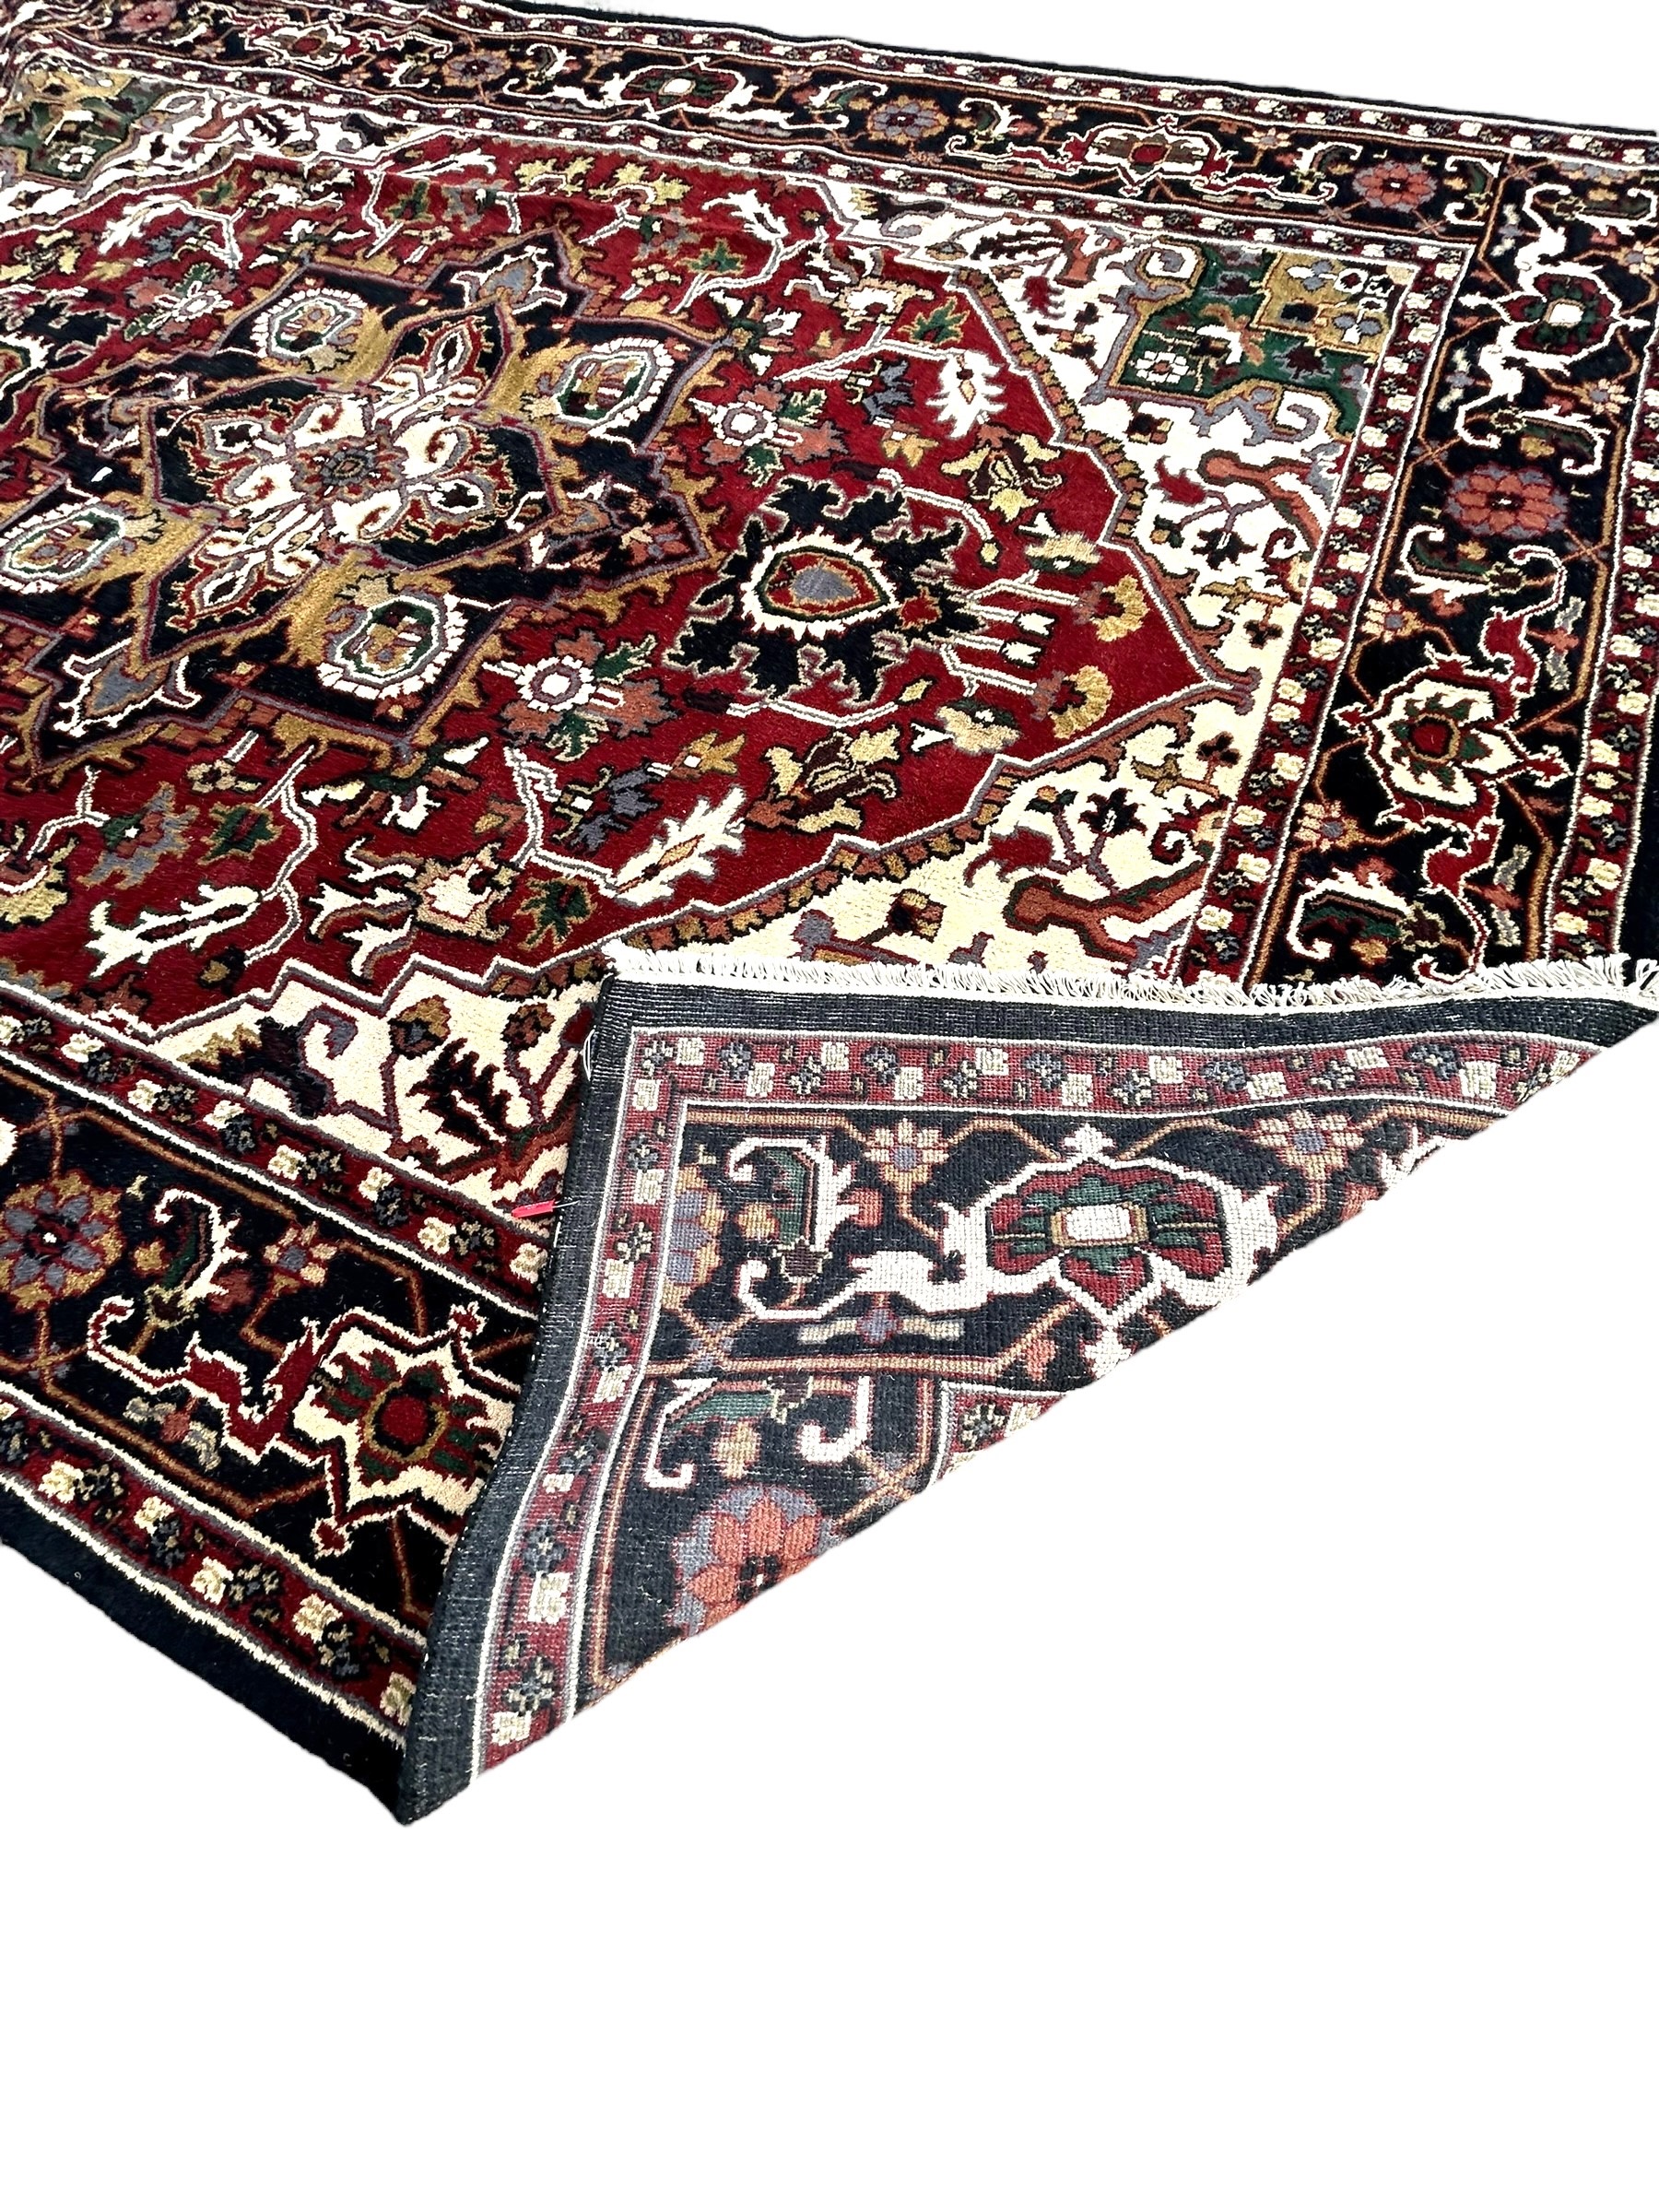 A 20TH CENTURY PERSIAN STYLE HERIZ CARPET Having central floral medallion on red and white ground, - Image 4 of 4